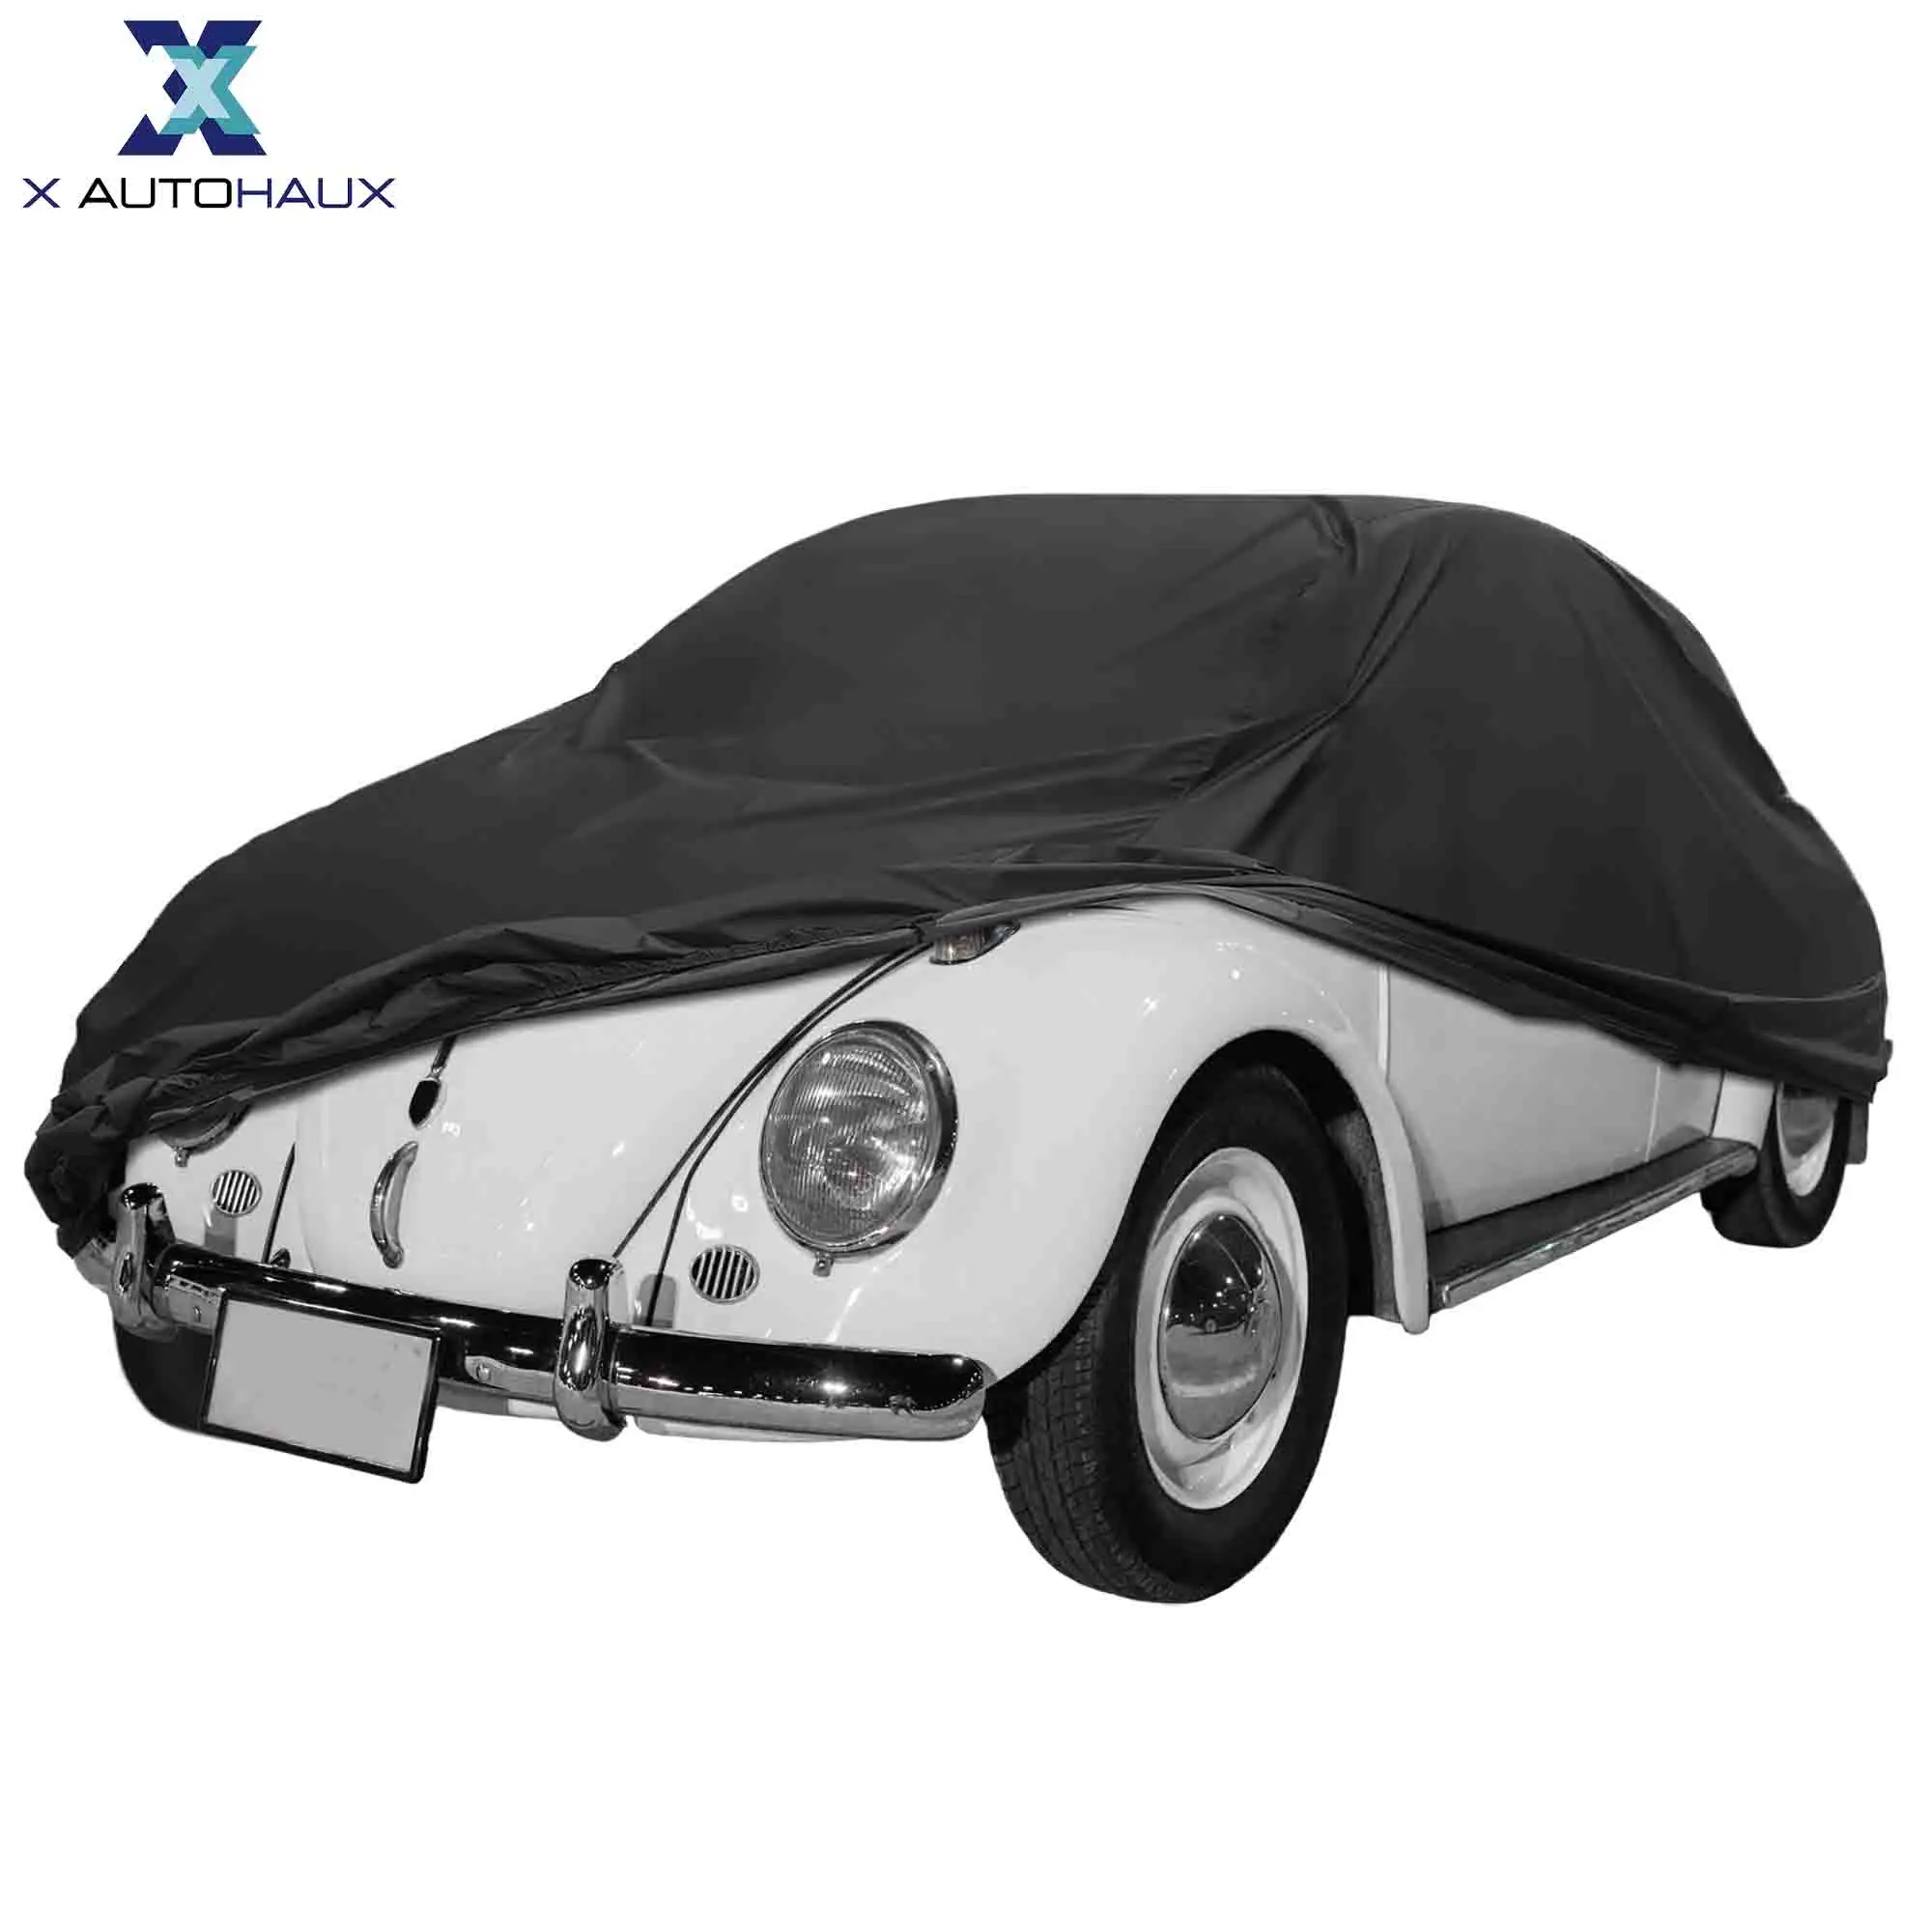 

X Autohaux Waterproof Car Cover for Volkswagen Beetle 1960-1980 Outdoor Full Car Cover All Weather Protection with Zipper